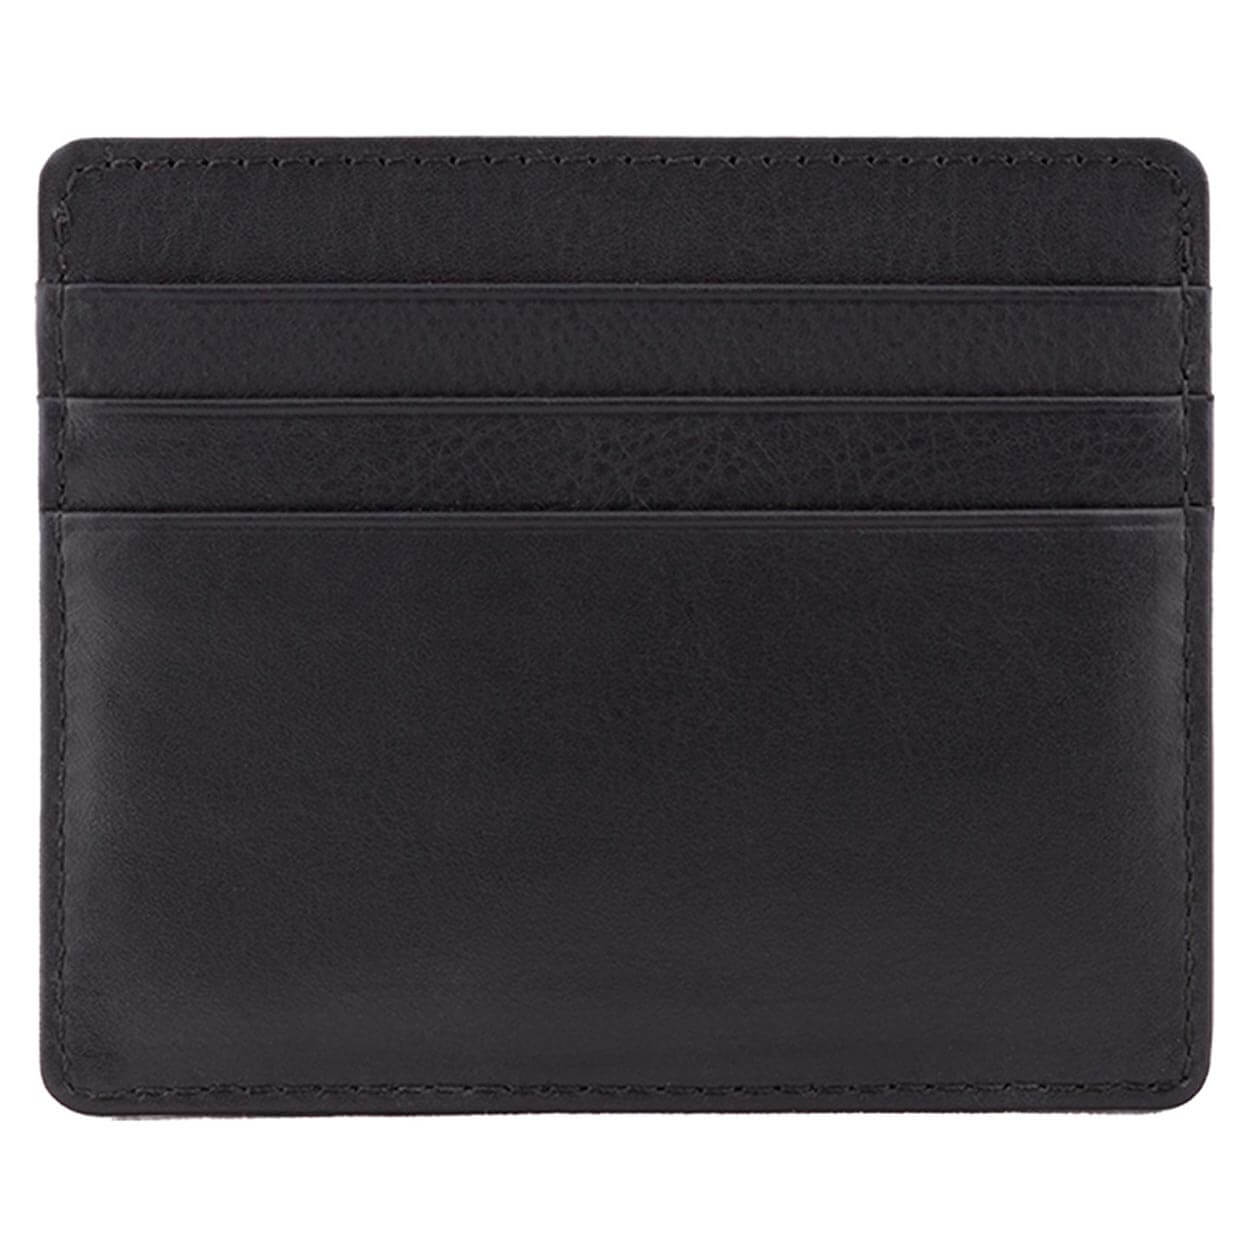  DAILYCARRYCO. Ultra Thin Leather Wallet - Slim RFID